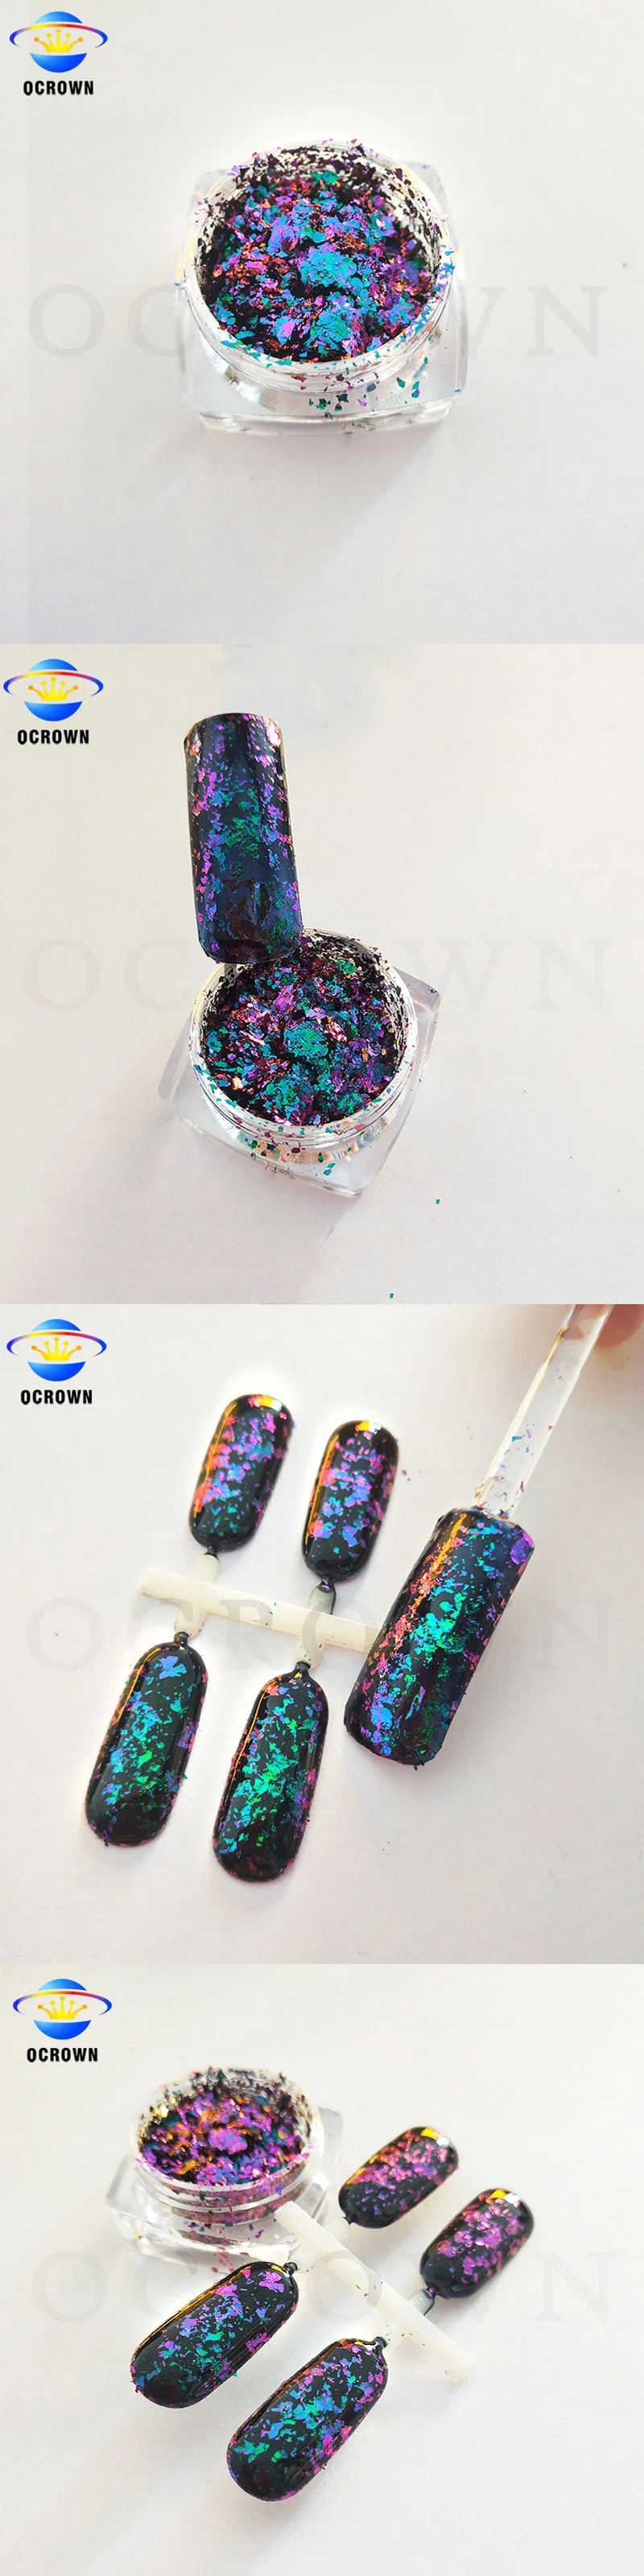 Chameleon Flakes Colors Shifting Chameleon Pearlescent Pigment Eyeshadow Cosmetic Grade Pigment